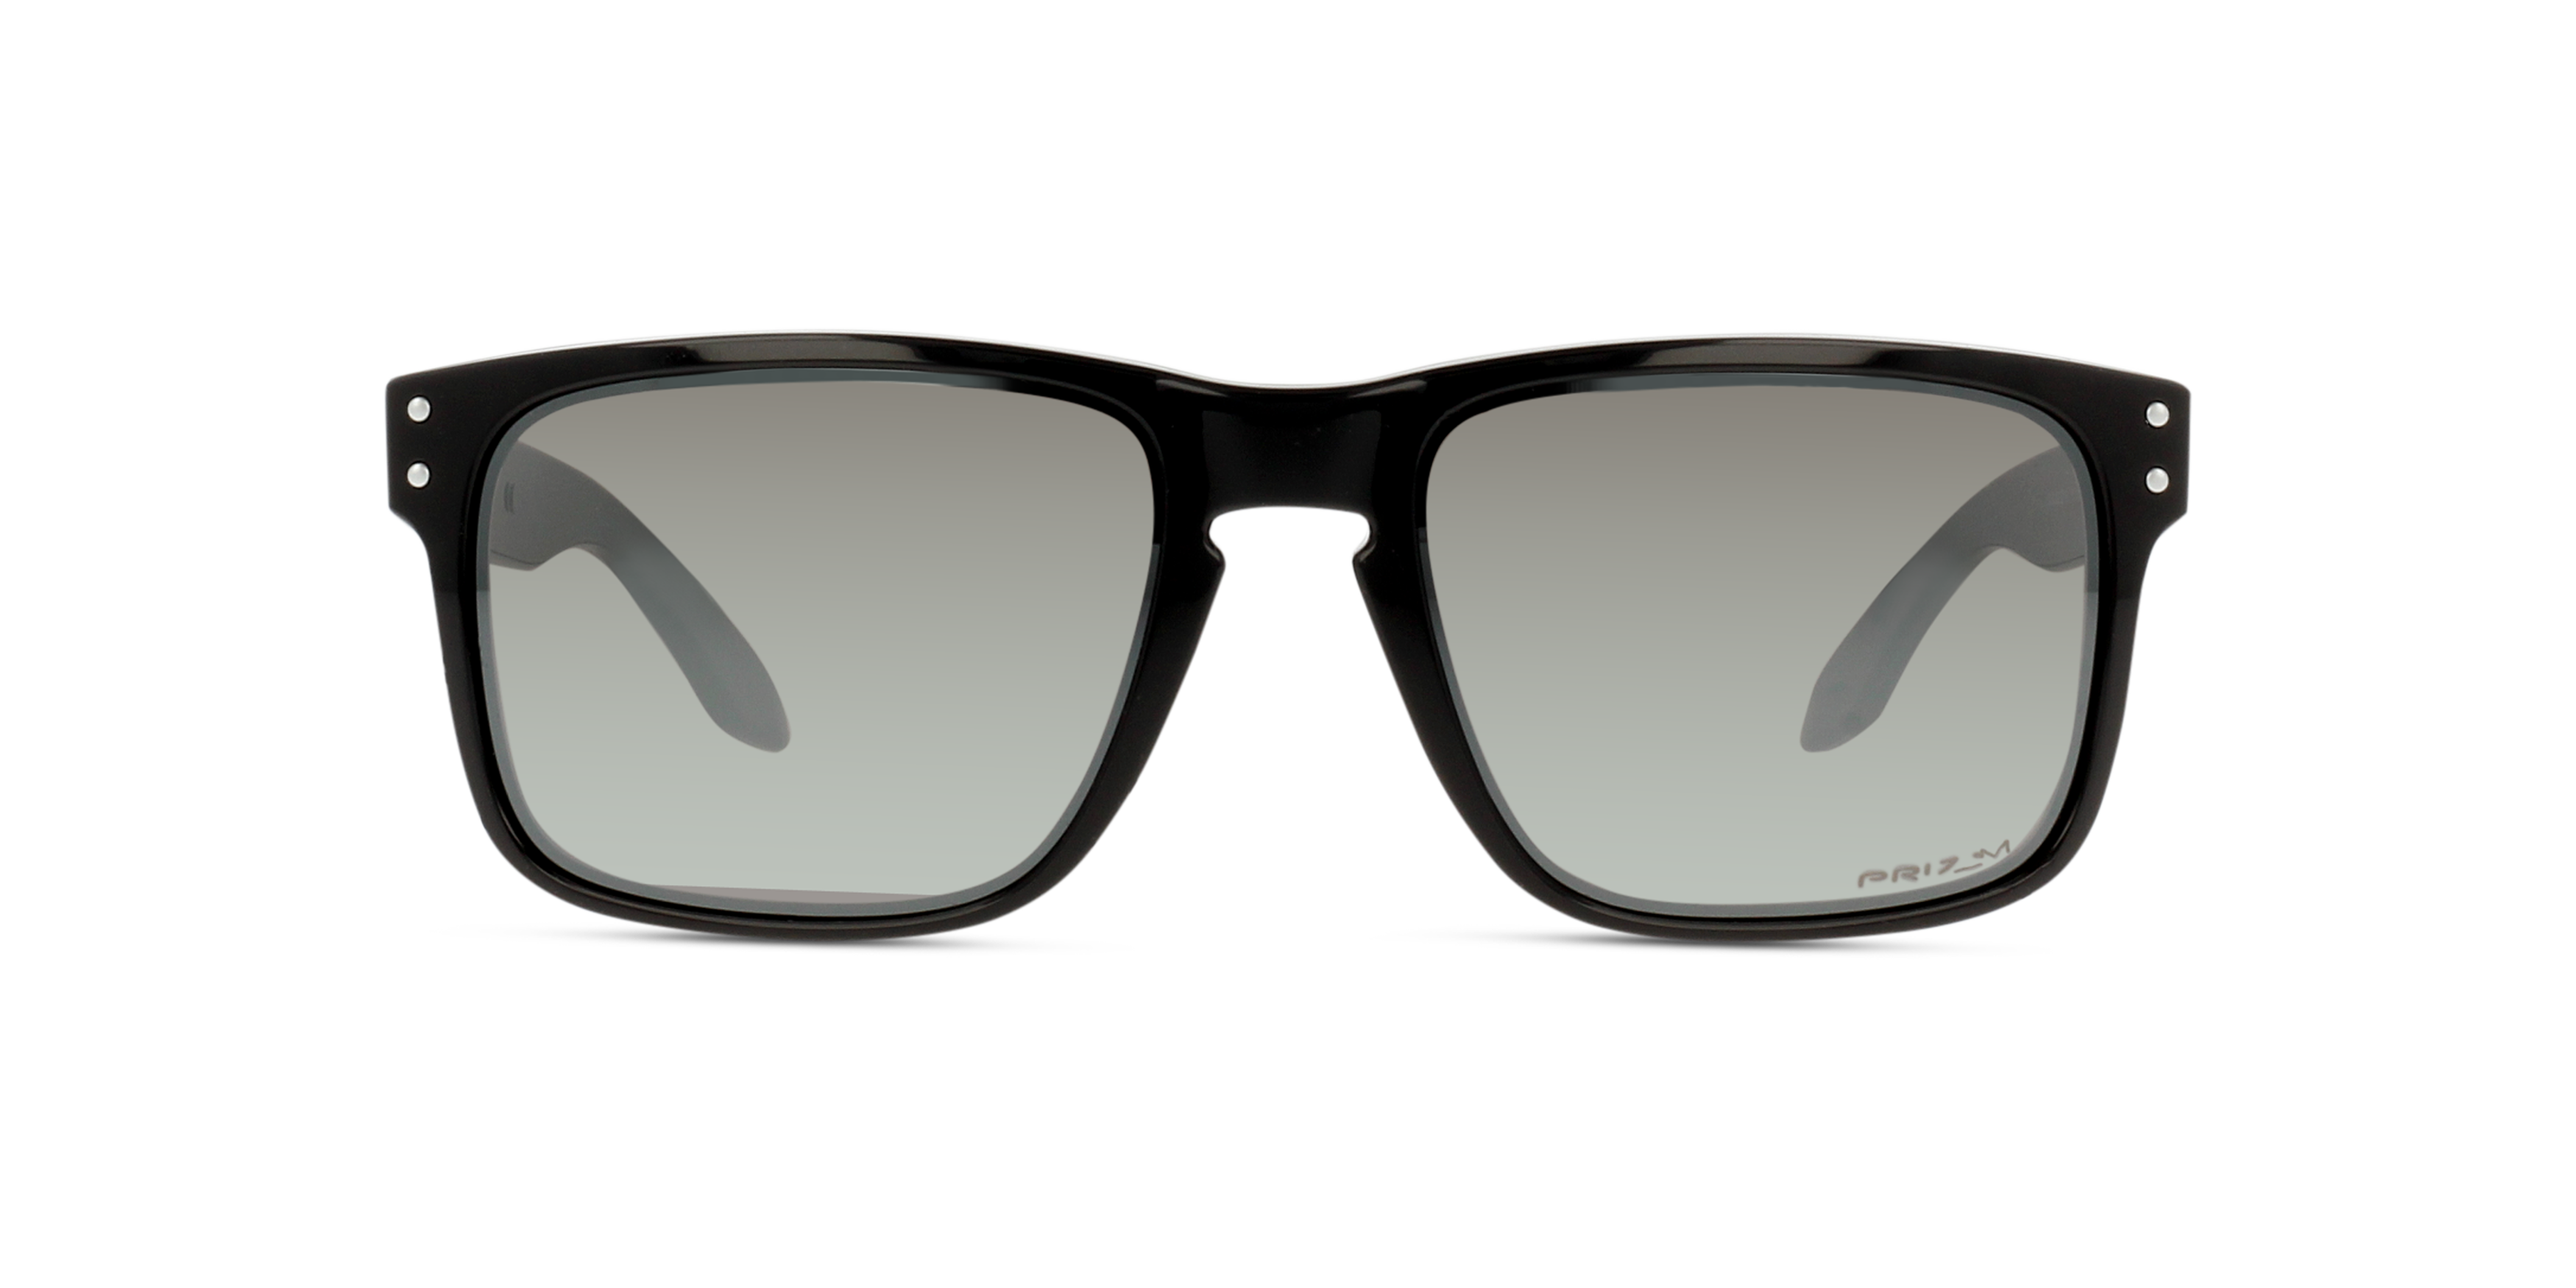 [products.image.front] OAKLEY HOLBROOK OO9102 9,10E+04